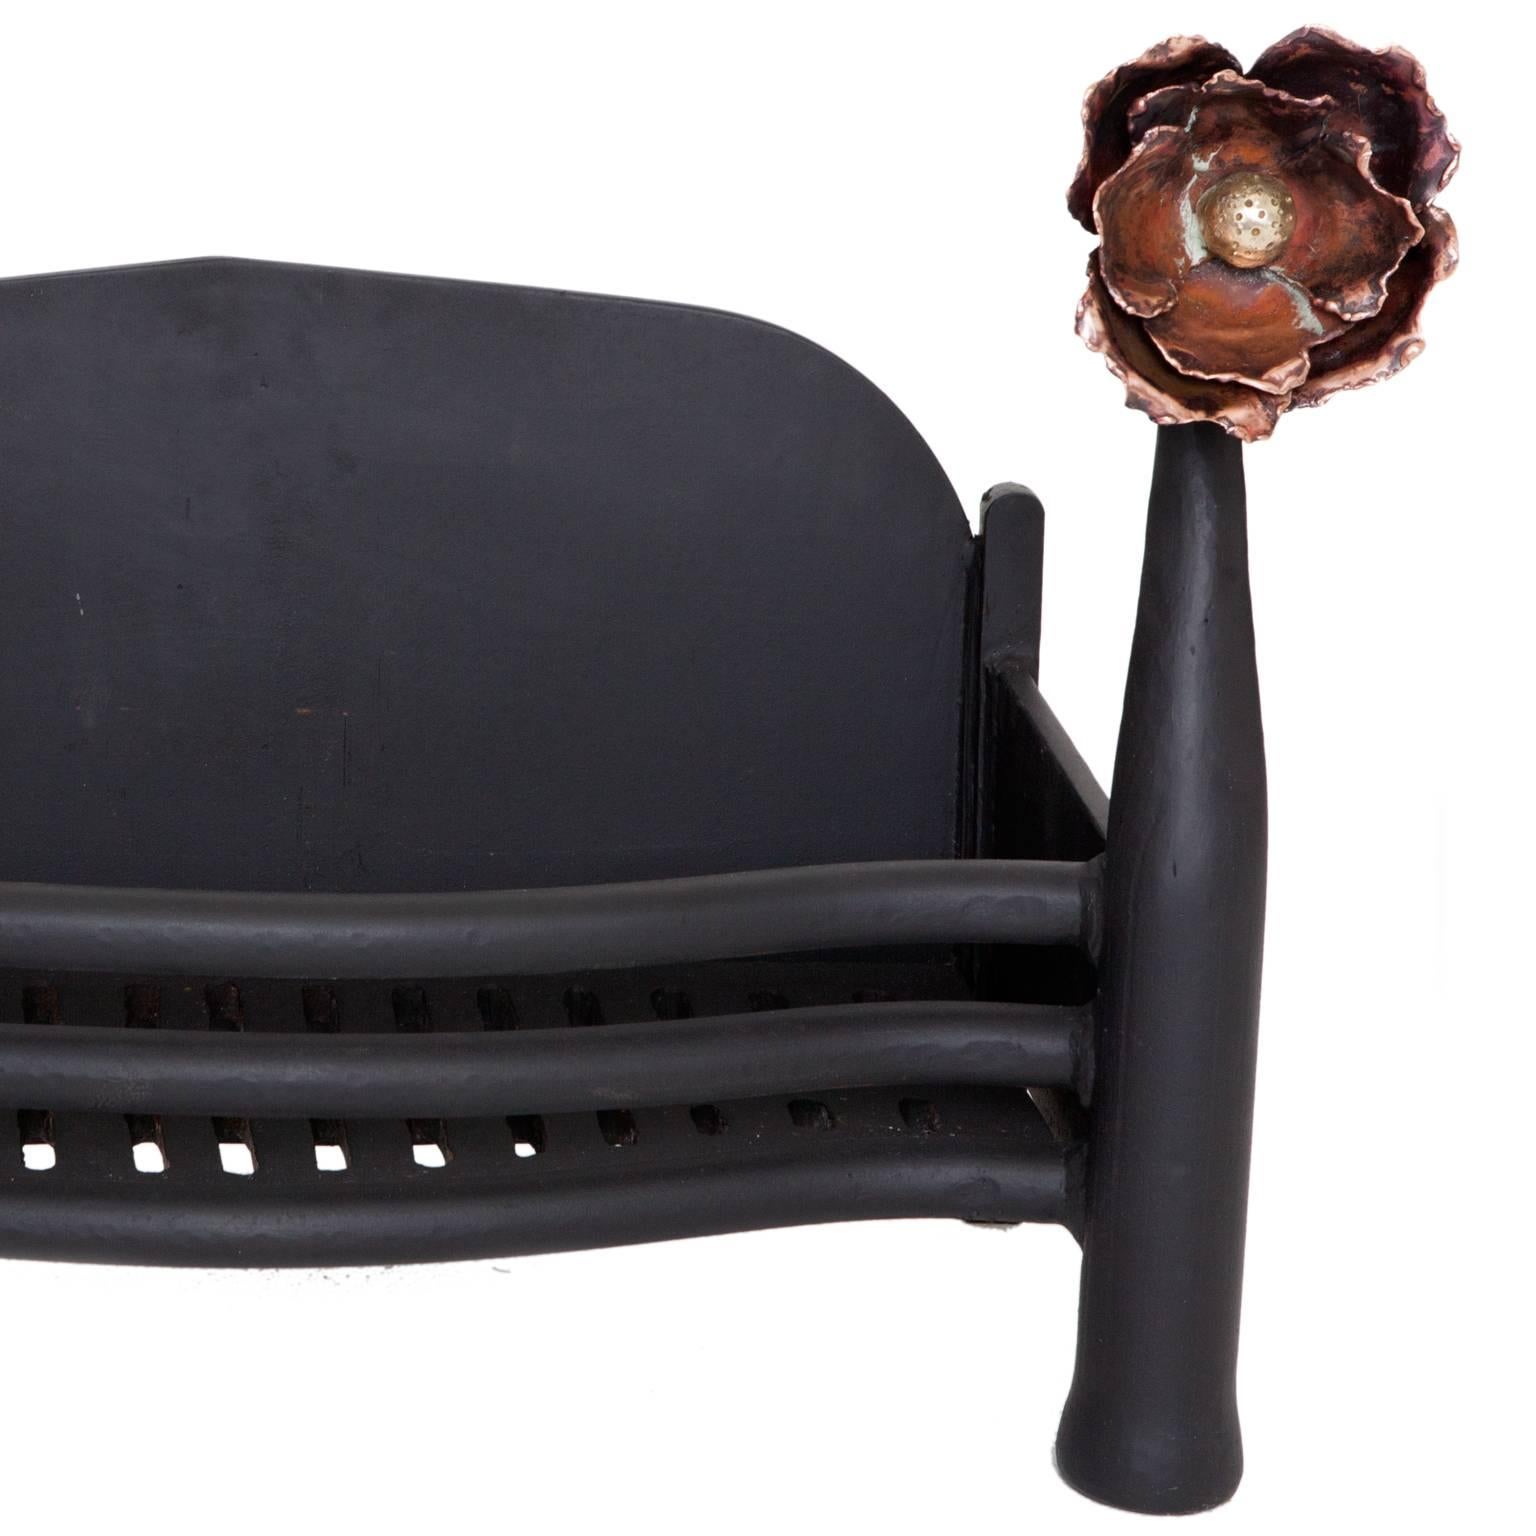 English cast-iron fire basket with copper and brass tulip heads on the fire dogs. Very unusual art nouveau basket example.